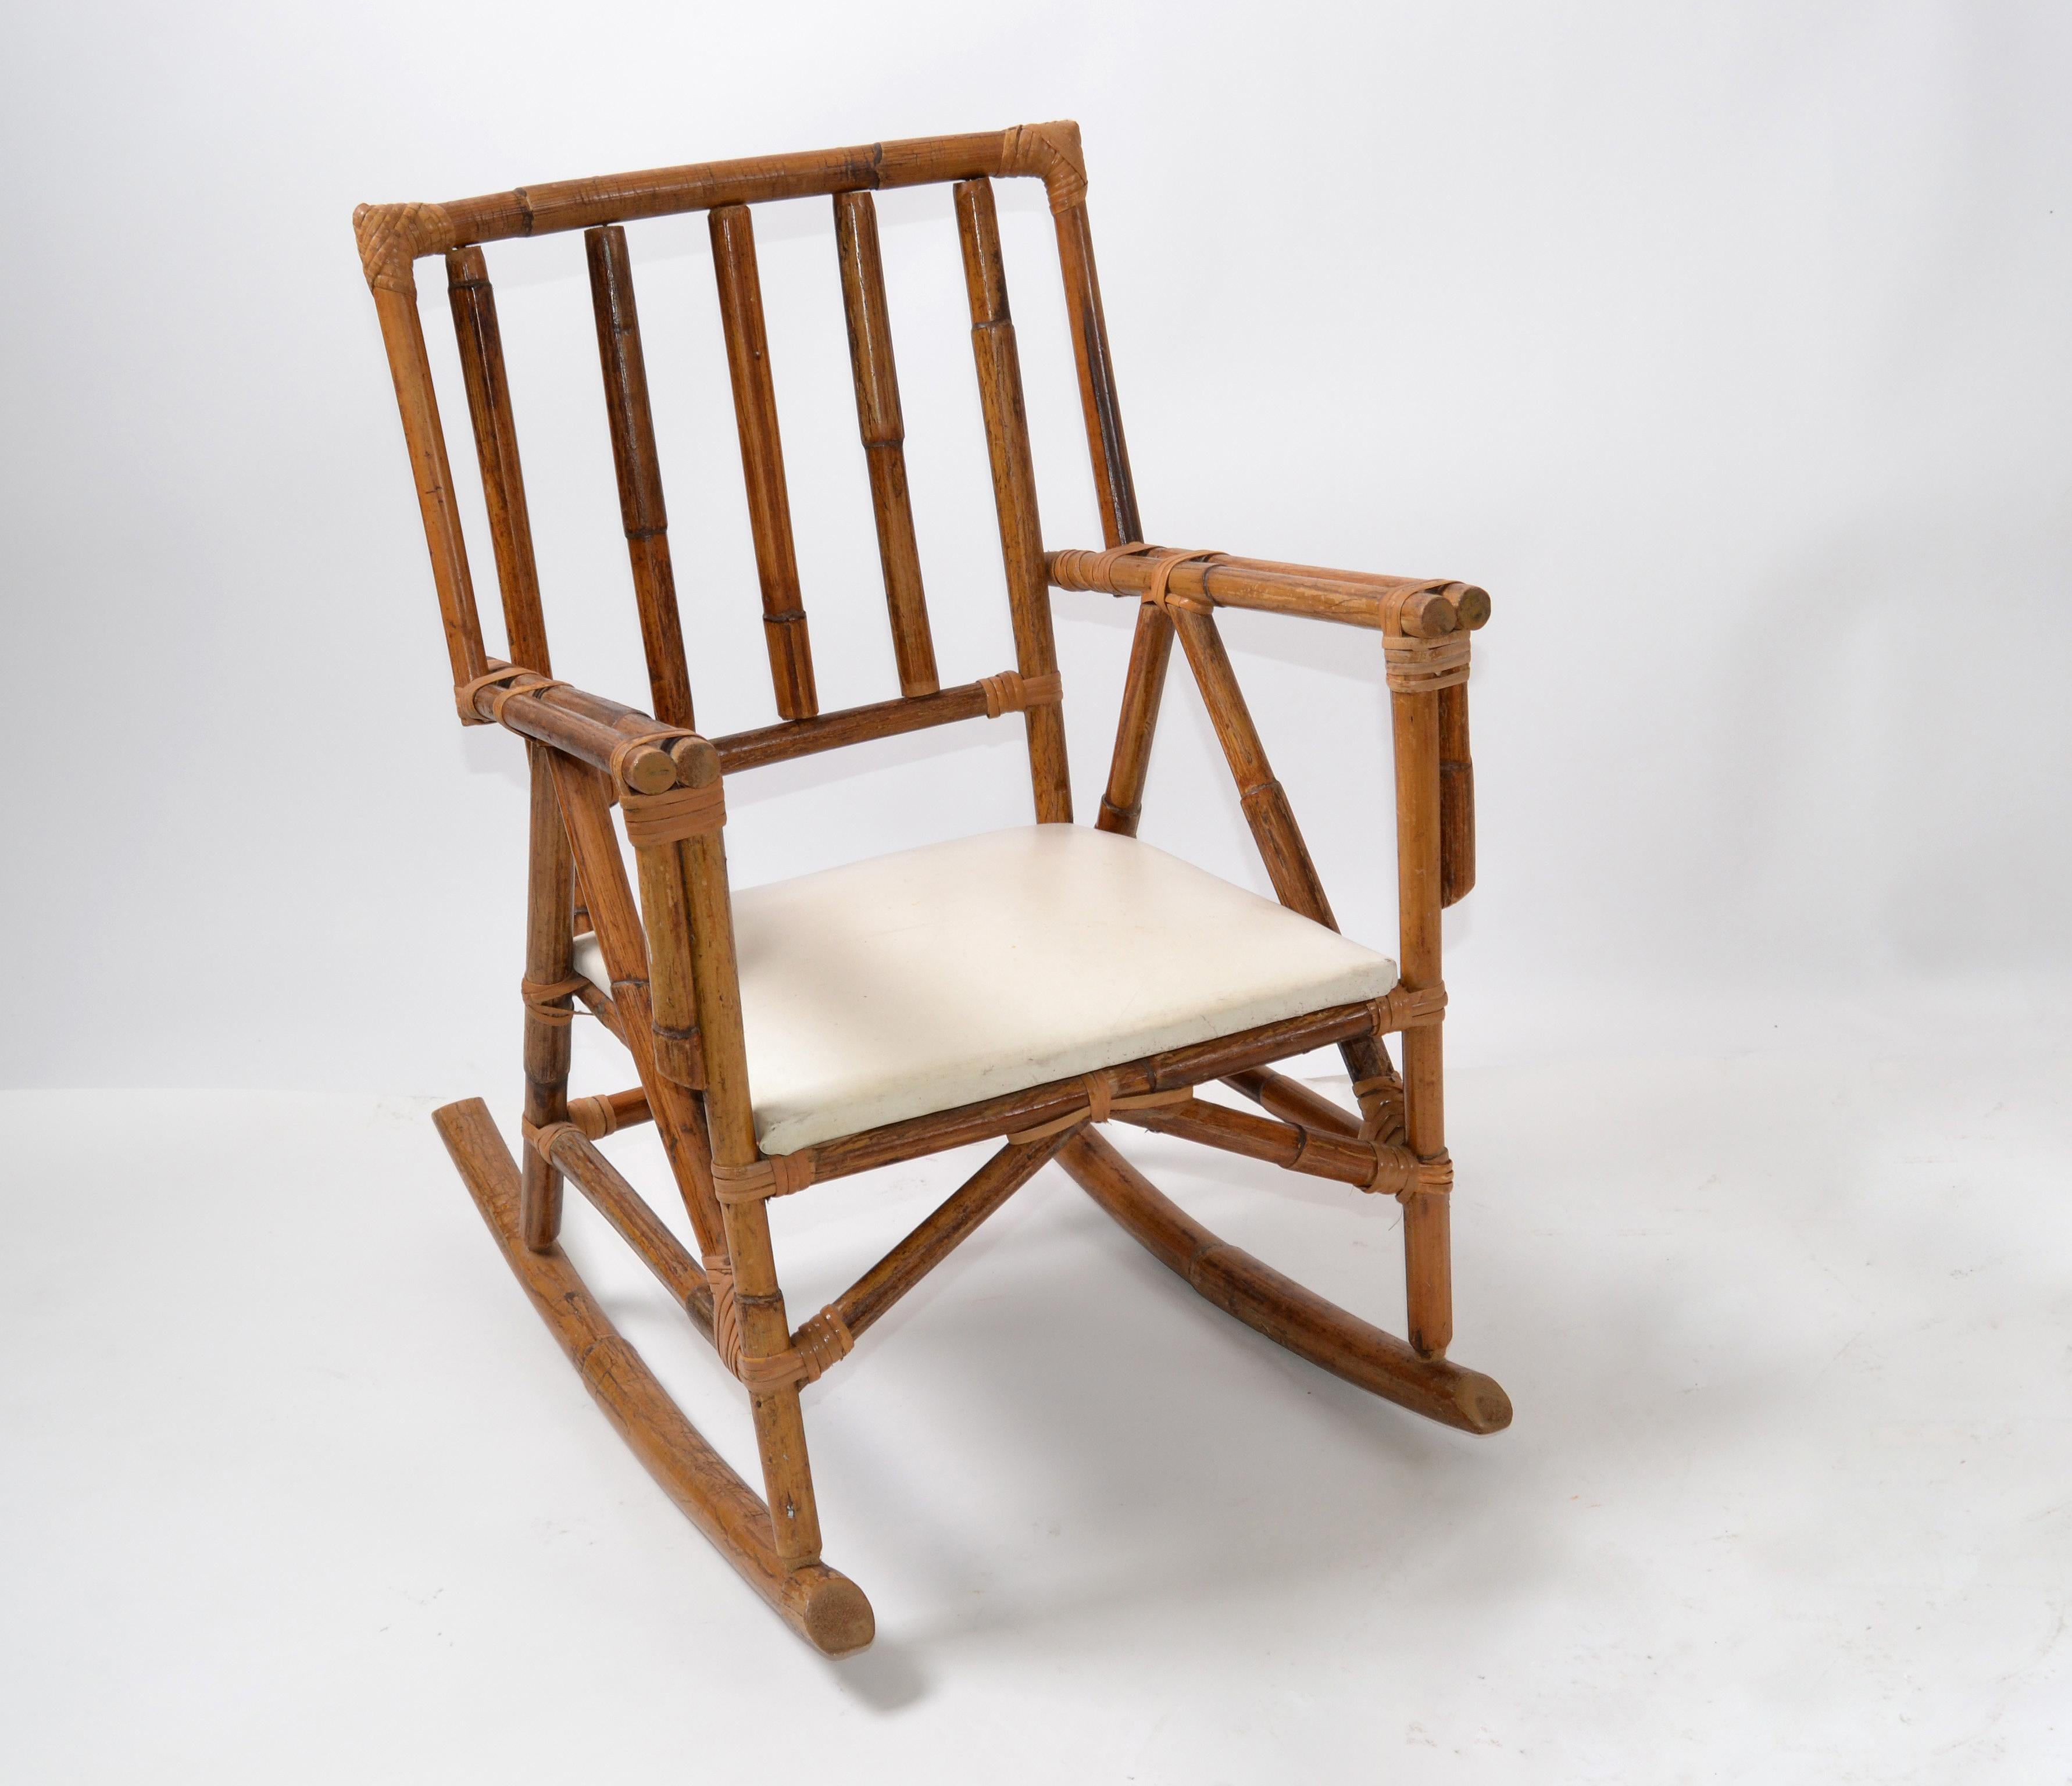 Cute bohemian bamboo and vinyl seat children rocking armchair.
The chair is firm and sturdy, a fun item for your kids.